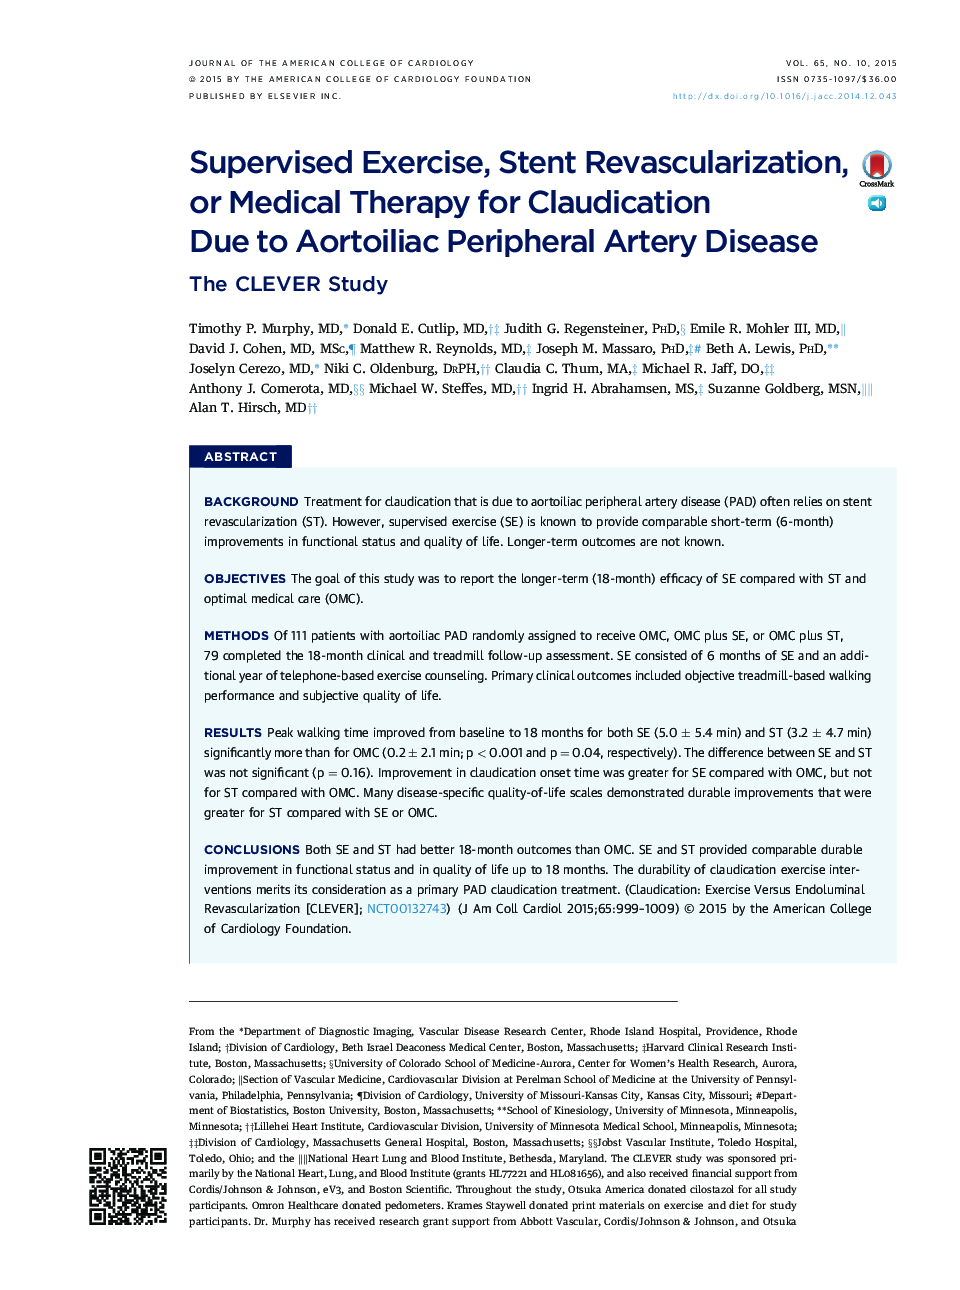 Supervised Exercise, Stent Revascularization, or MedicalÂ Therapy forÂ Claudication Due to Aortoiliac Peripheral Artery Disease: The CLEVER Study